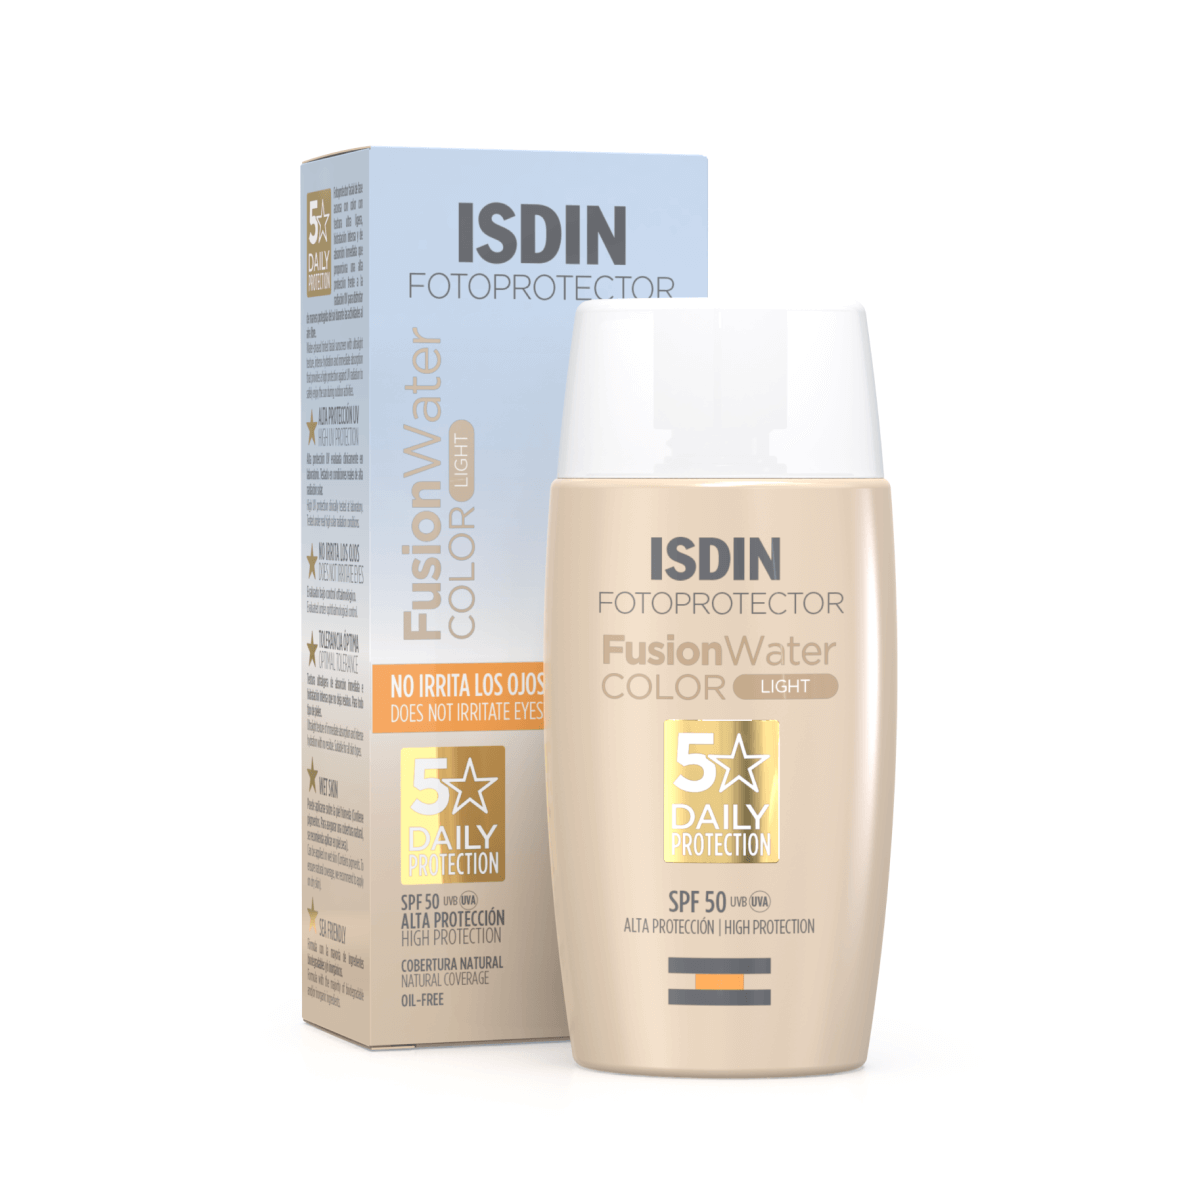 isdin-fusion-water-color-light